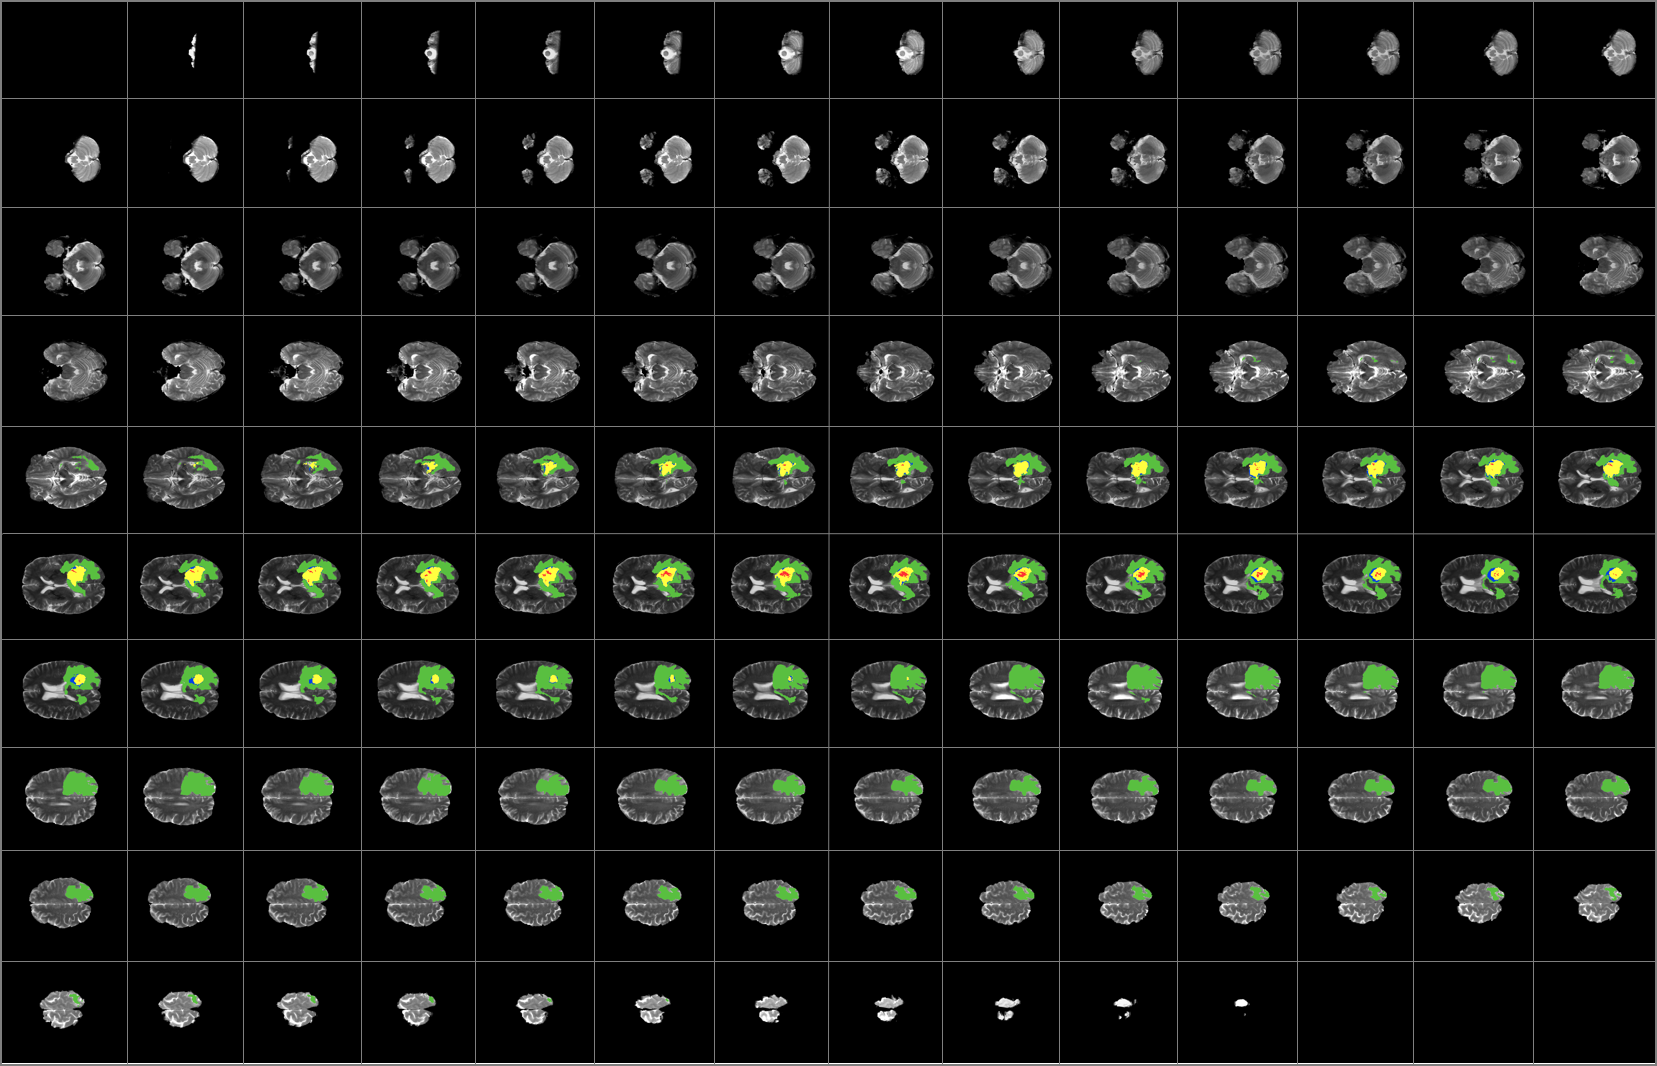 Results of the complete segmentation of a single brain